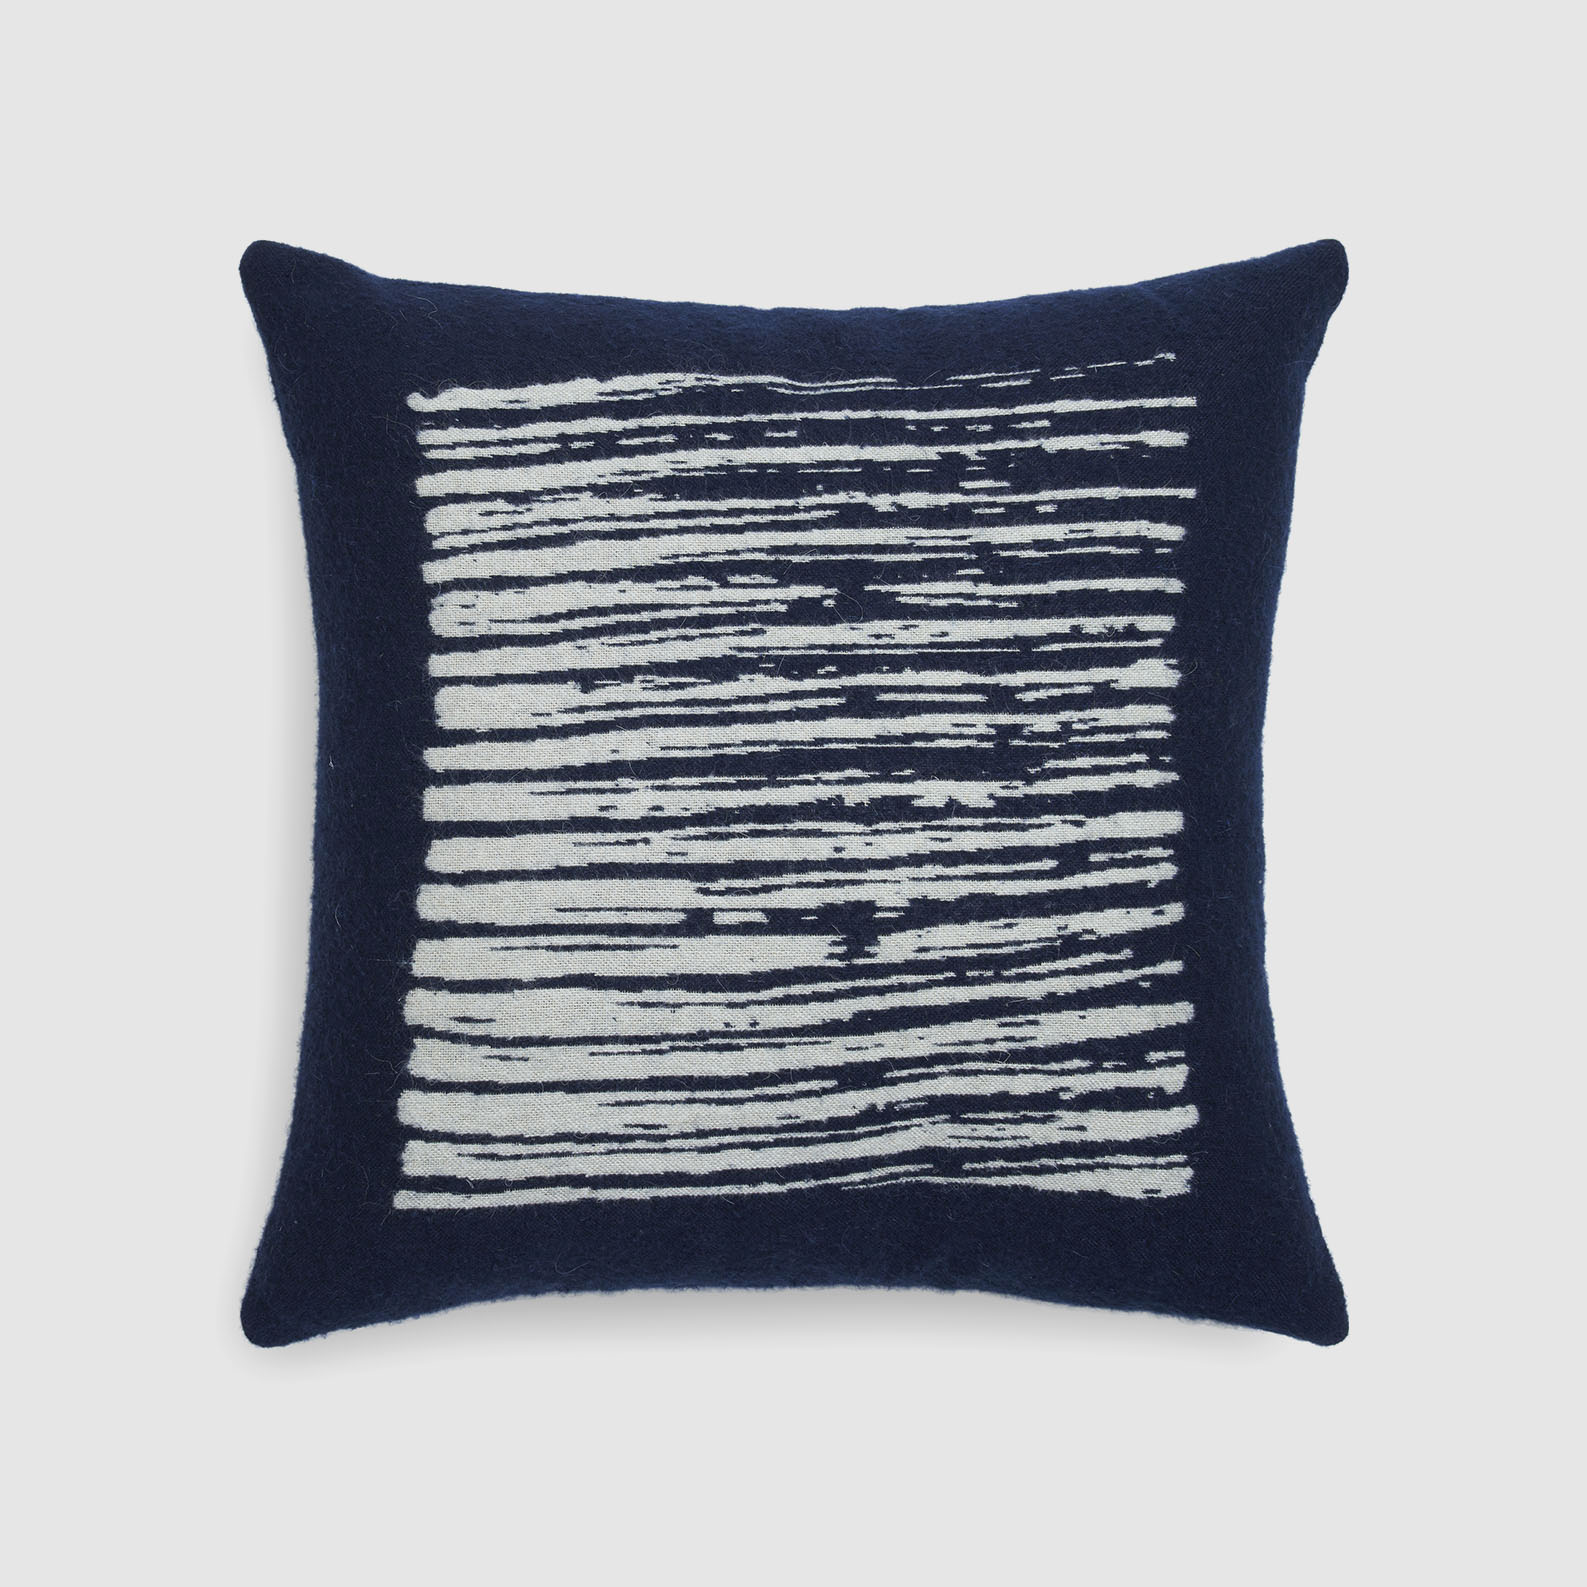 [21059*] Lines cushion - square  (Navy)